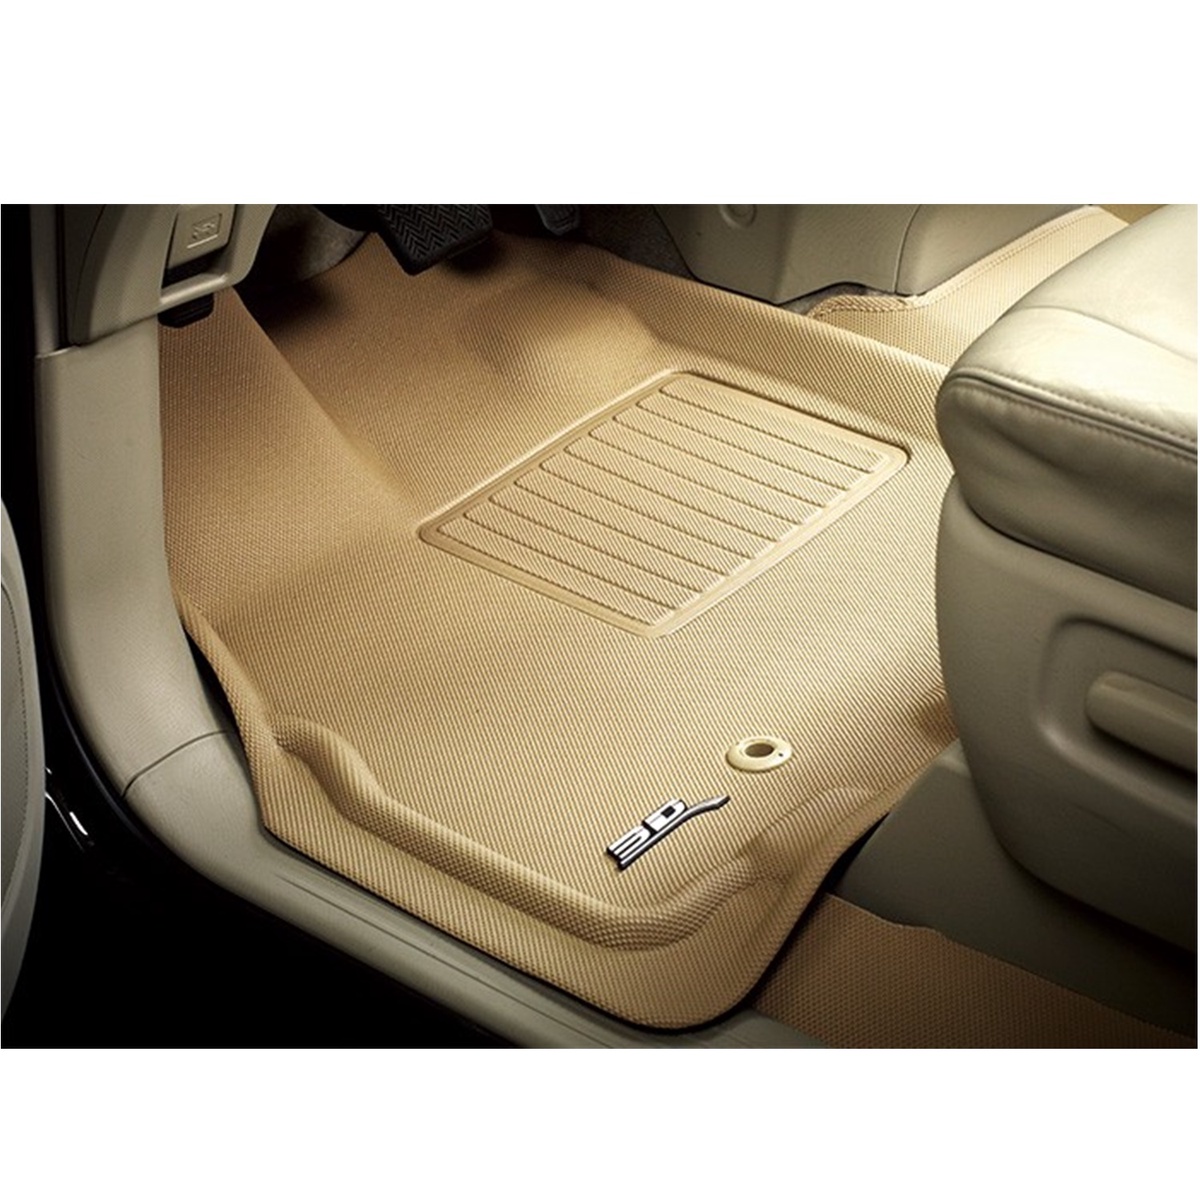 Use Simply Car Mats to Enhance Your Honda Jazz Driving Experience